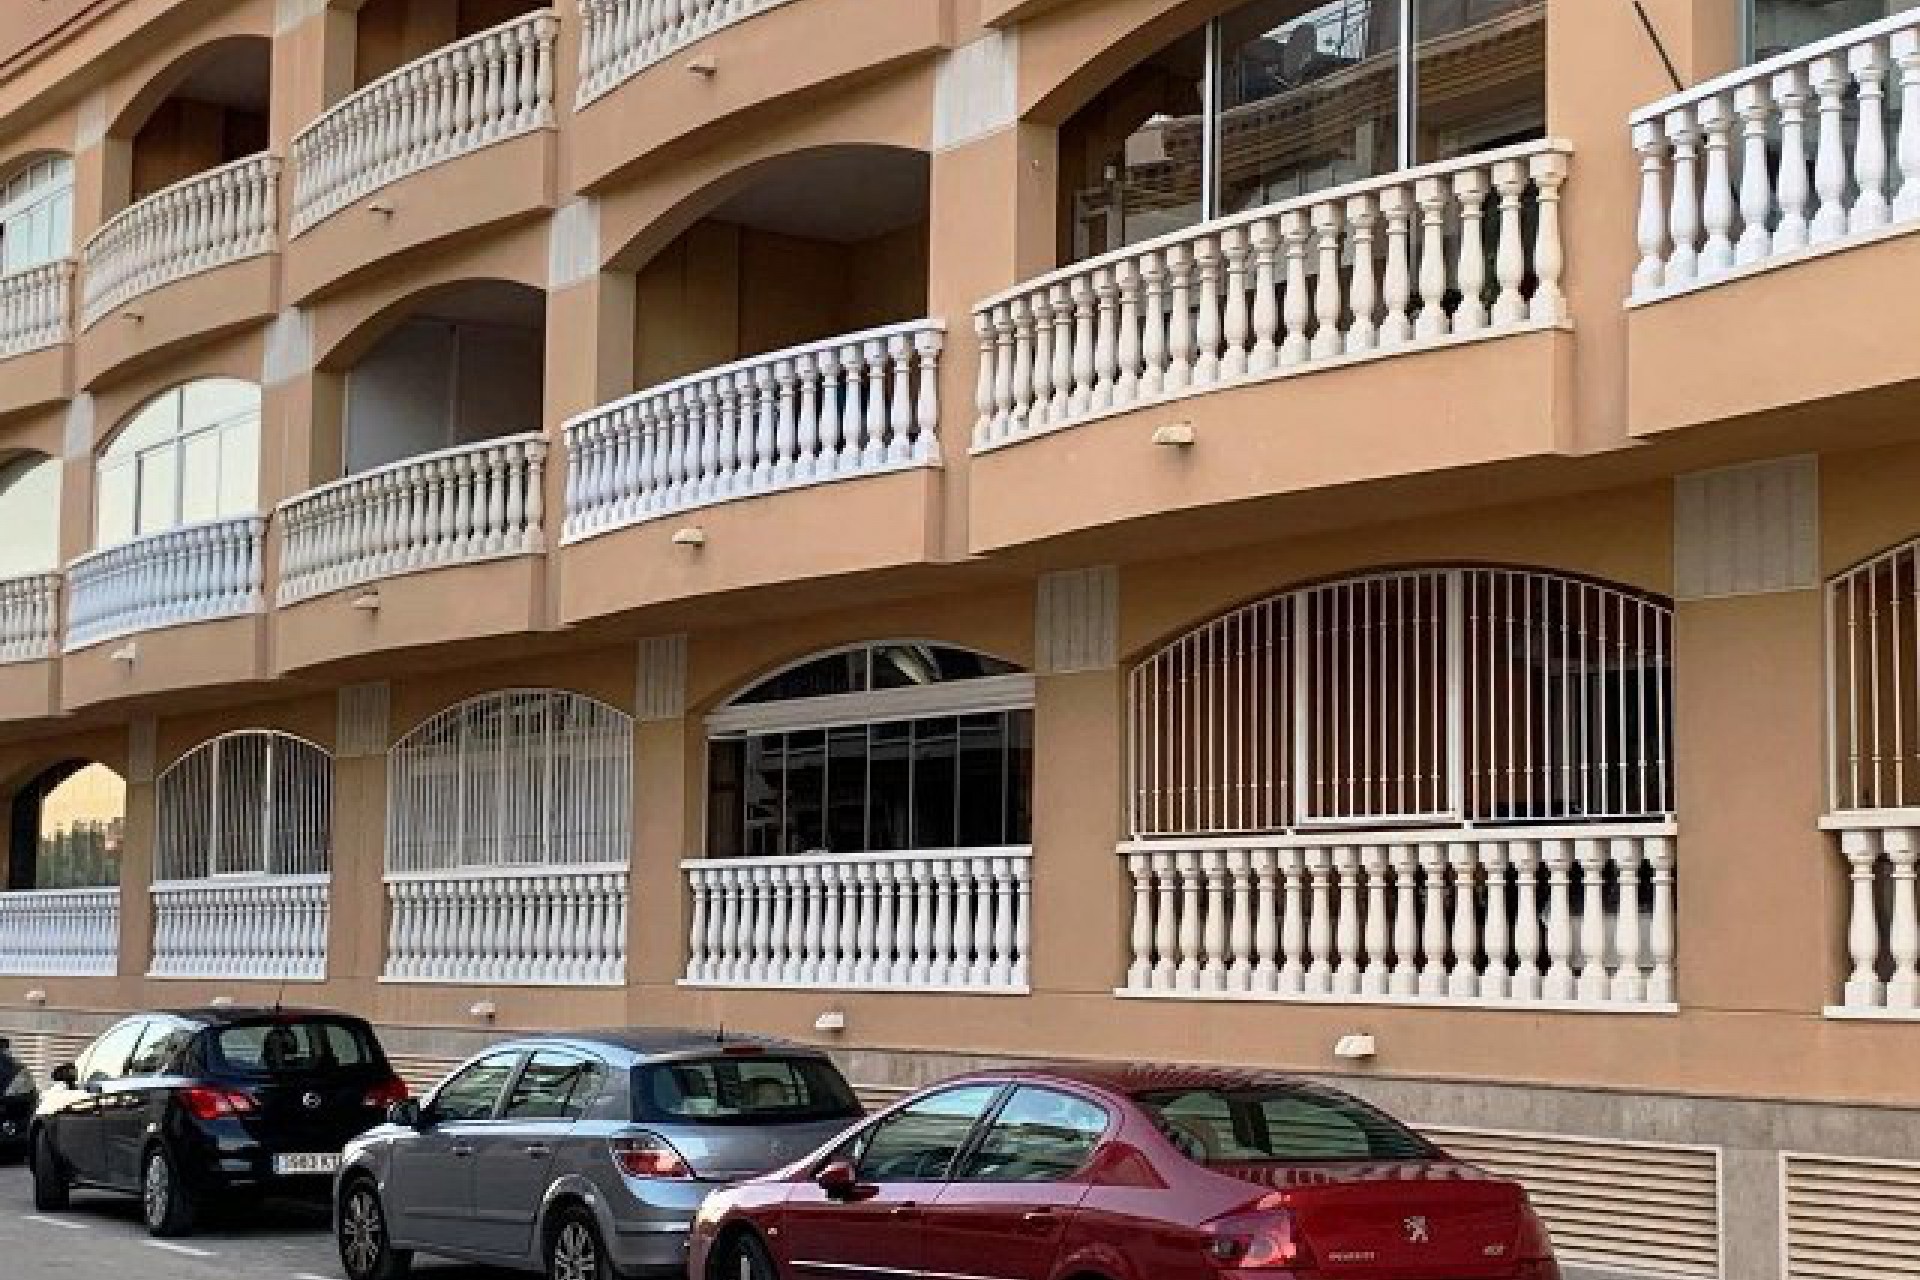 2 bedroom apartment / flat for sale in Dolores, Costa Blanca